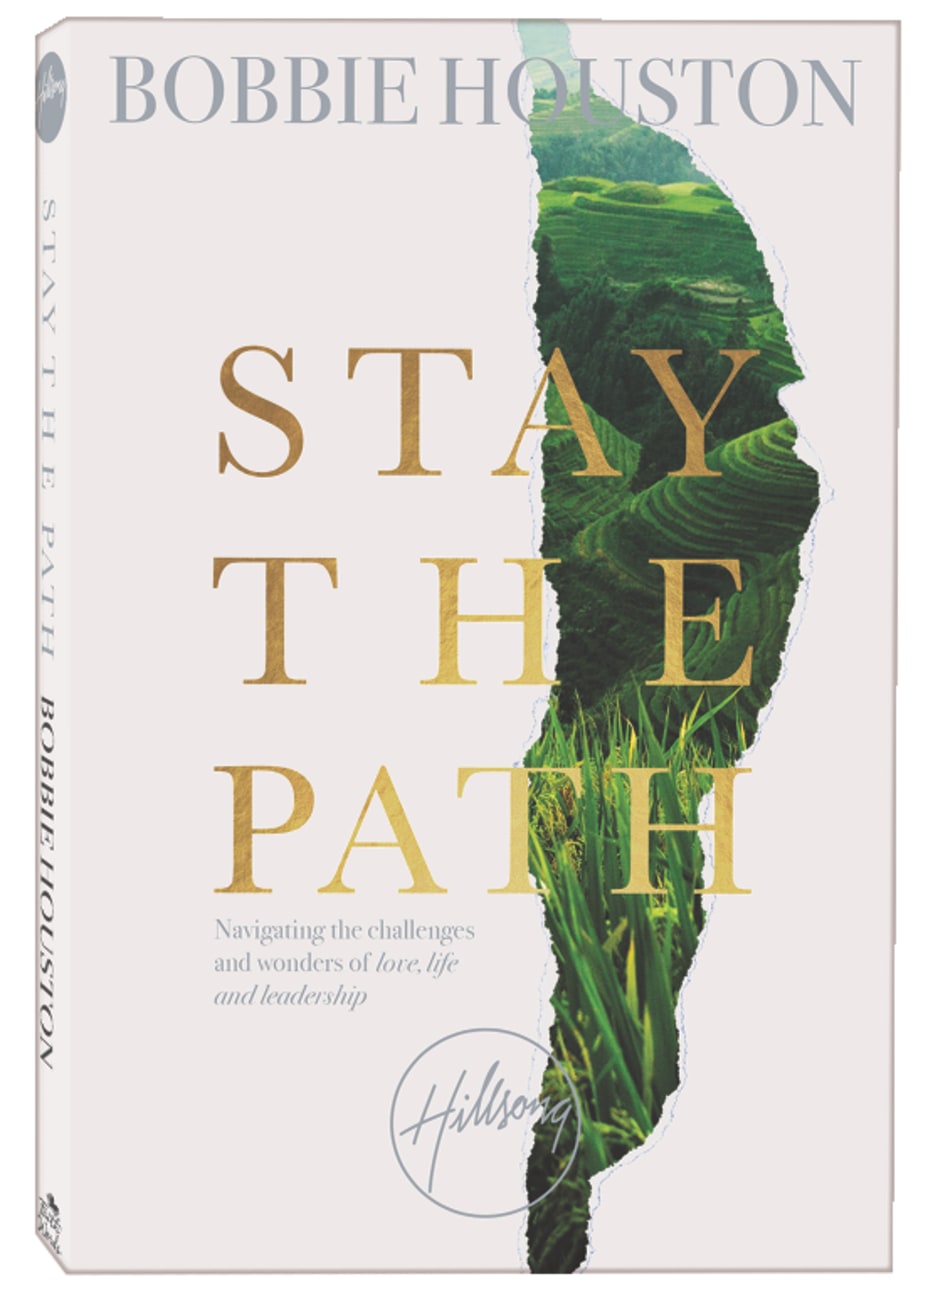 Stay the Path: Navigating the Challenges and Wonder of Life, Love, and Leadership Paperback